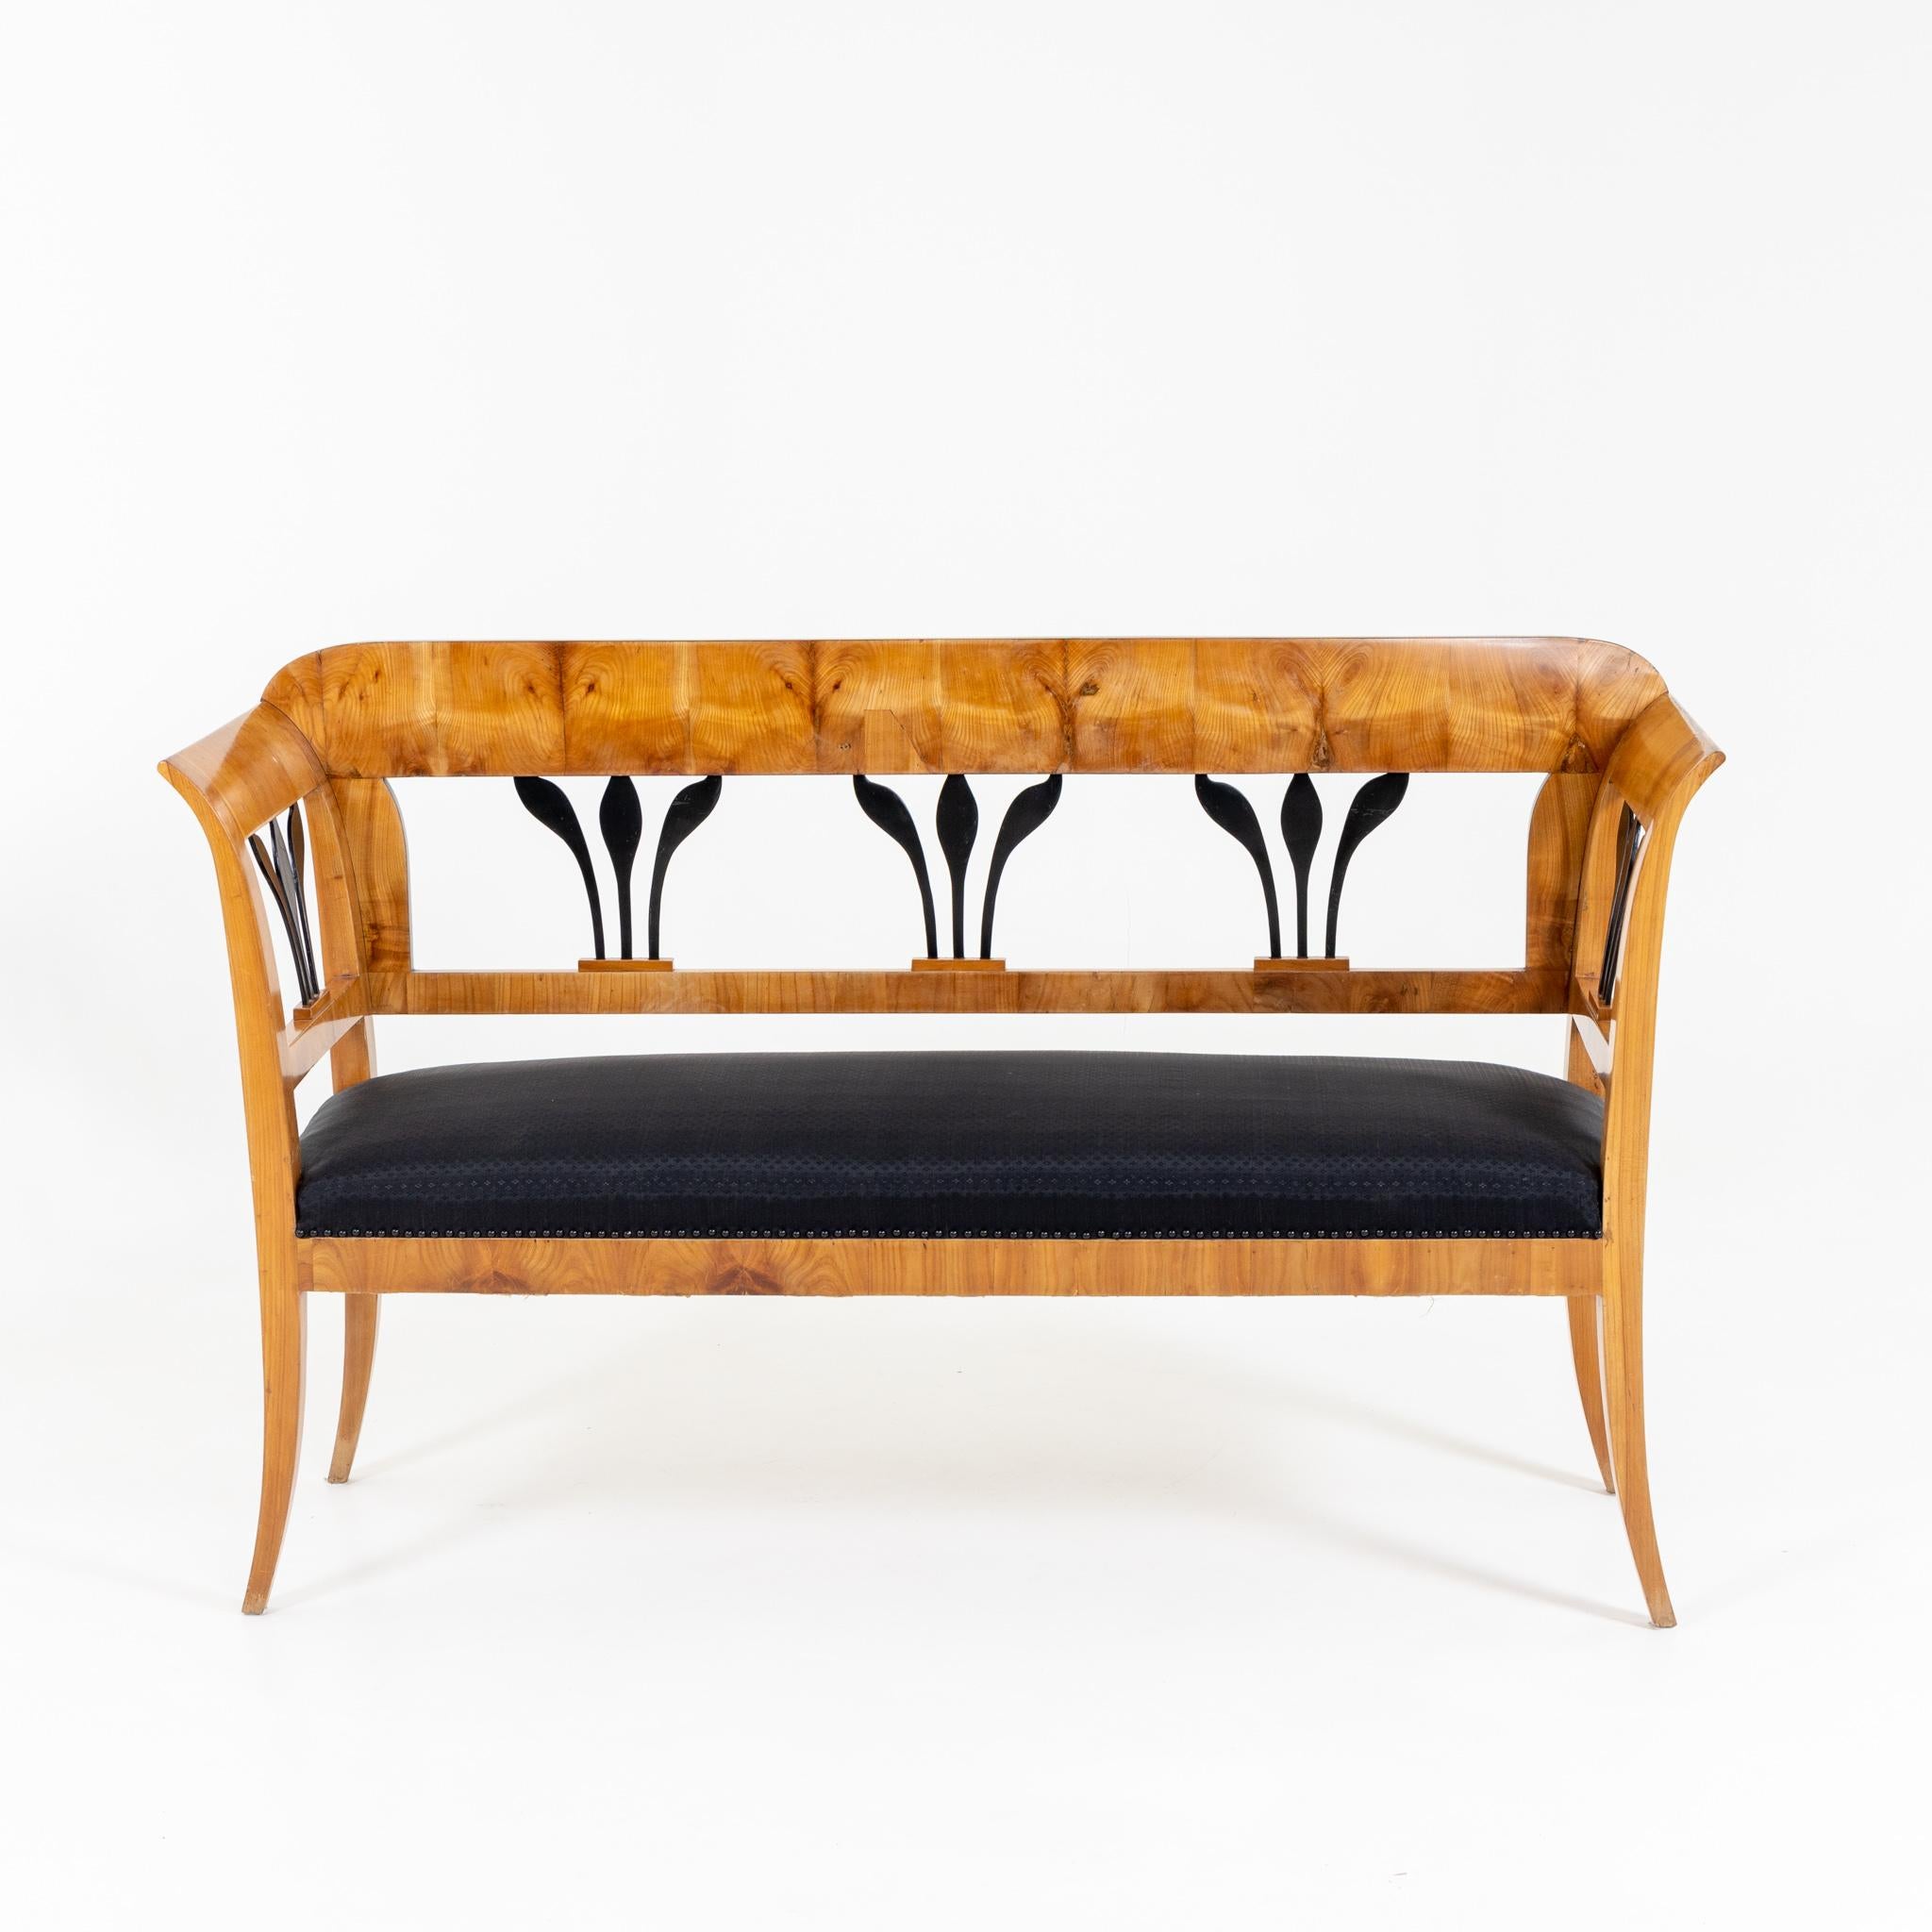 Biedermeier bench with openwork, partially ebonized backrest and upholstered seat. Ash veneered.